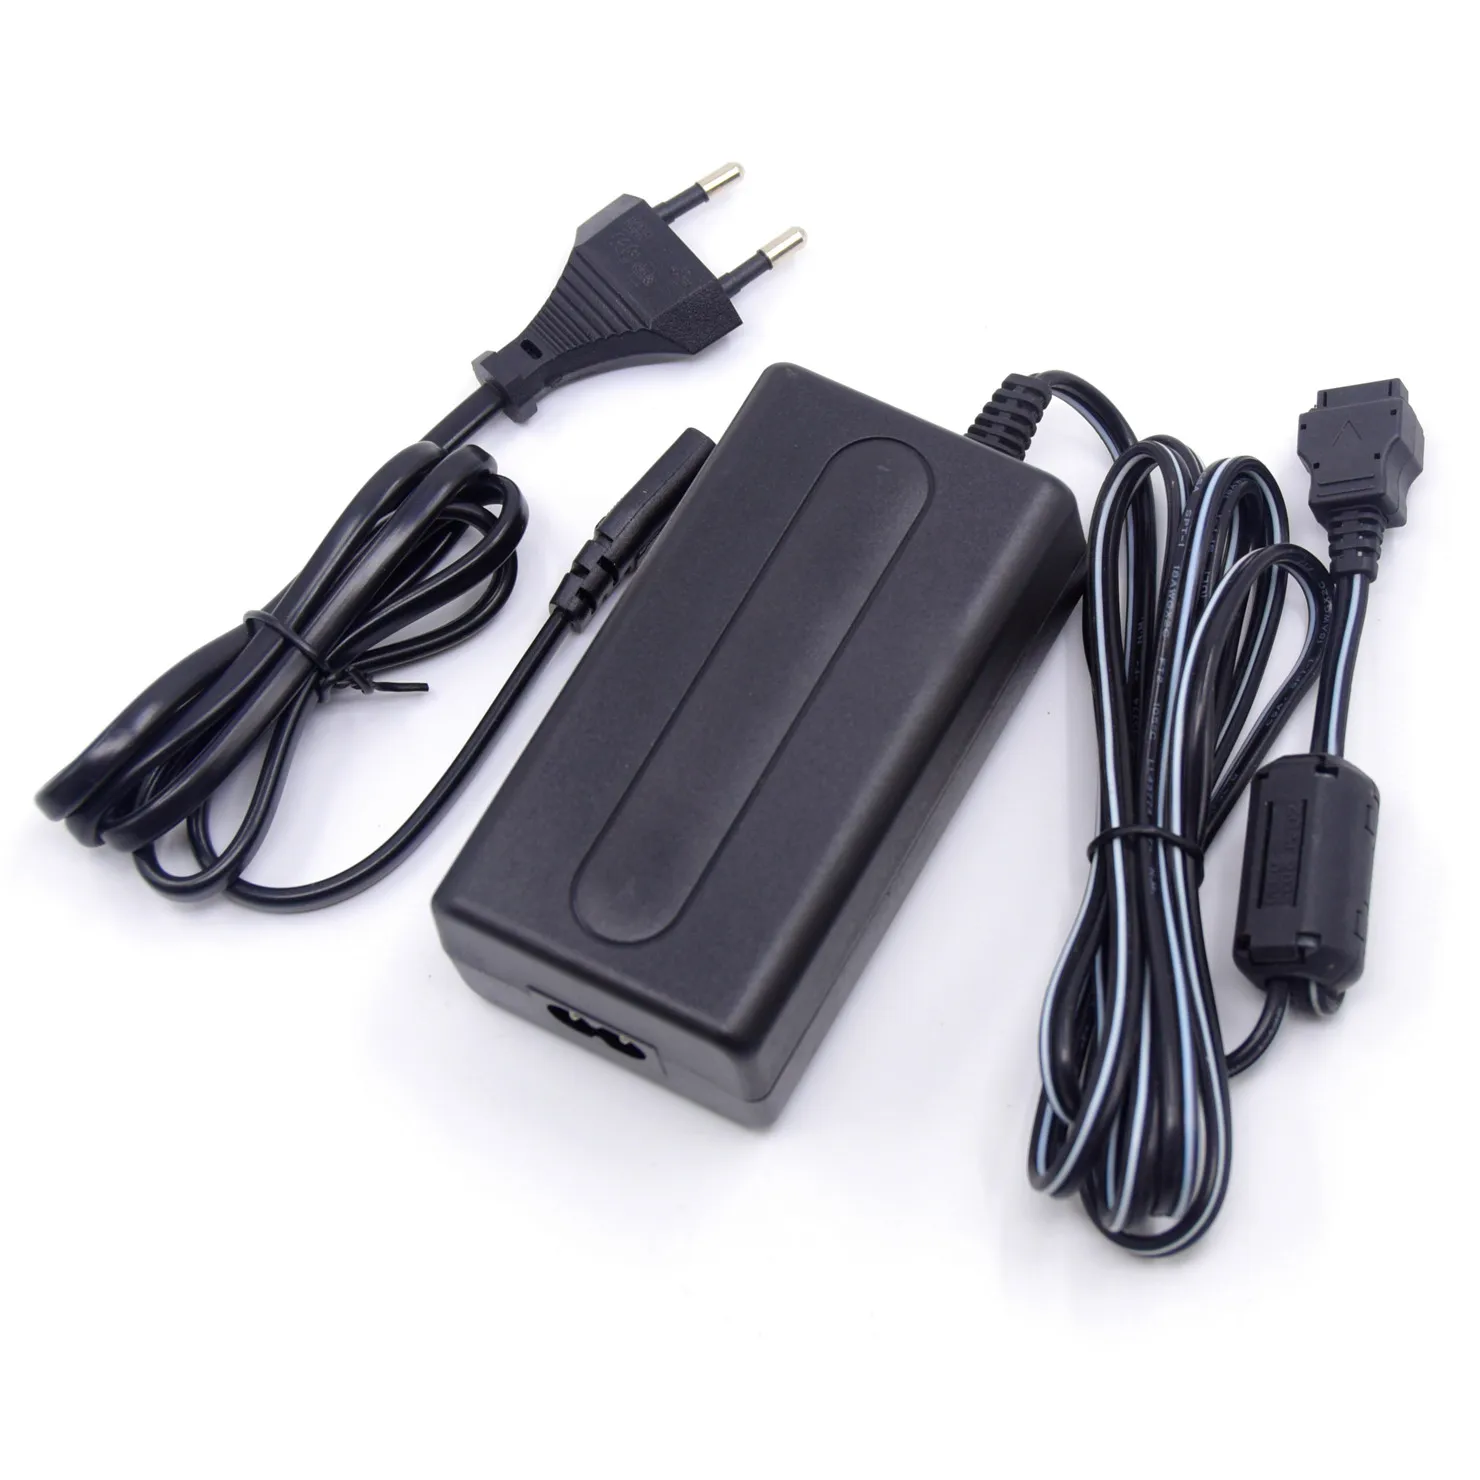 SONY AC-LM5 Adapter Battery Charger for DSC-T1 T3 T11 T33 M1 & Other Cameras 